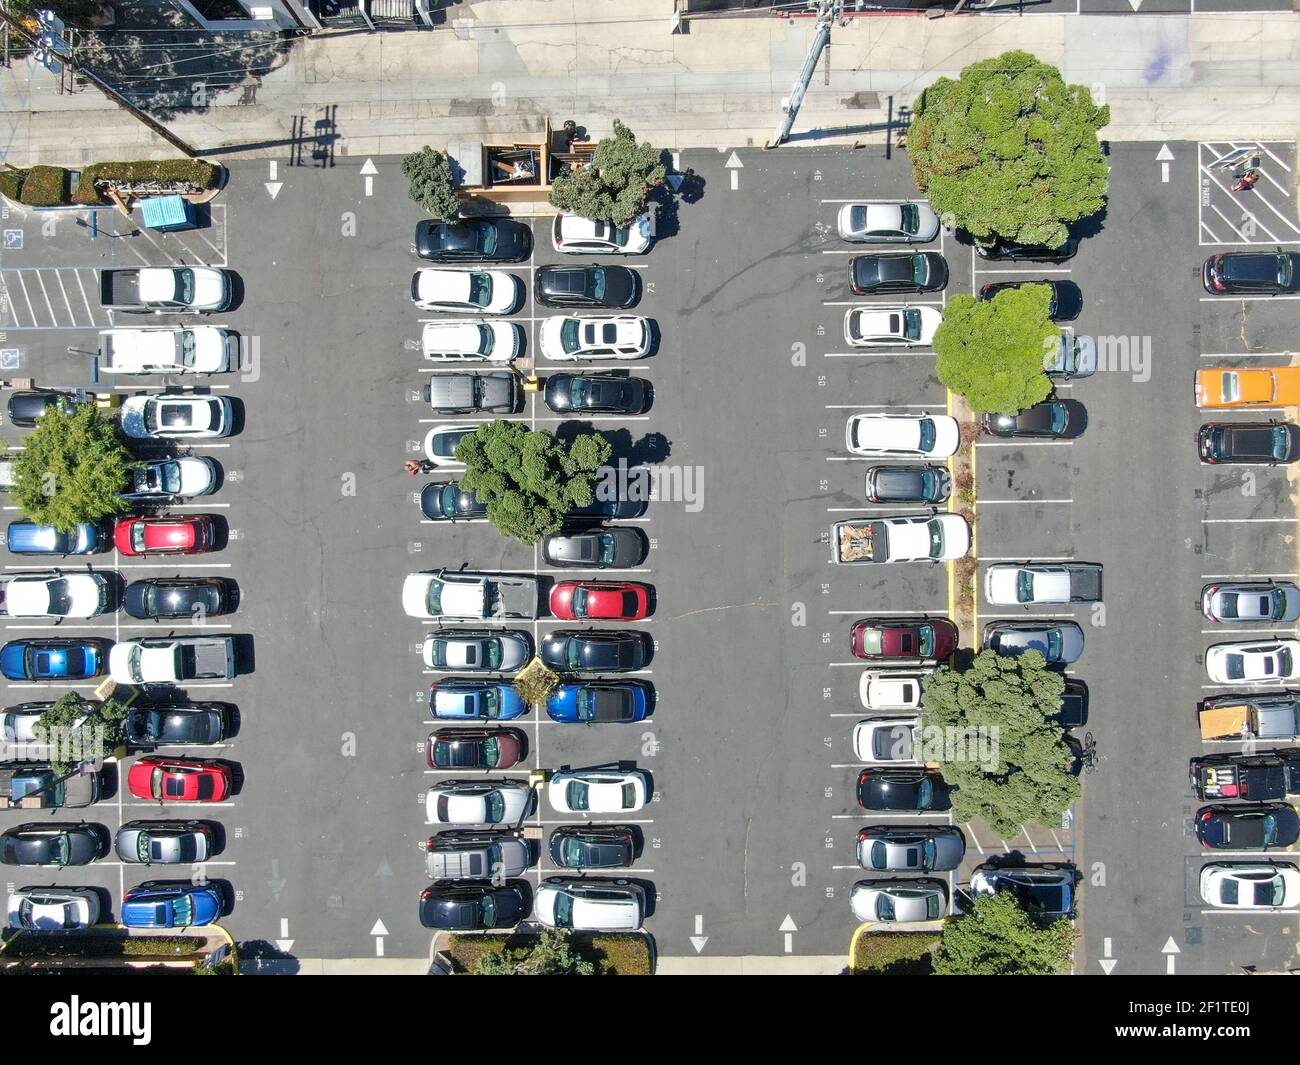 Aerial top view of parking lot with varieties of colored vehicles. Stock Photo